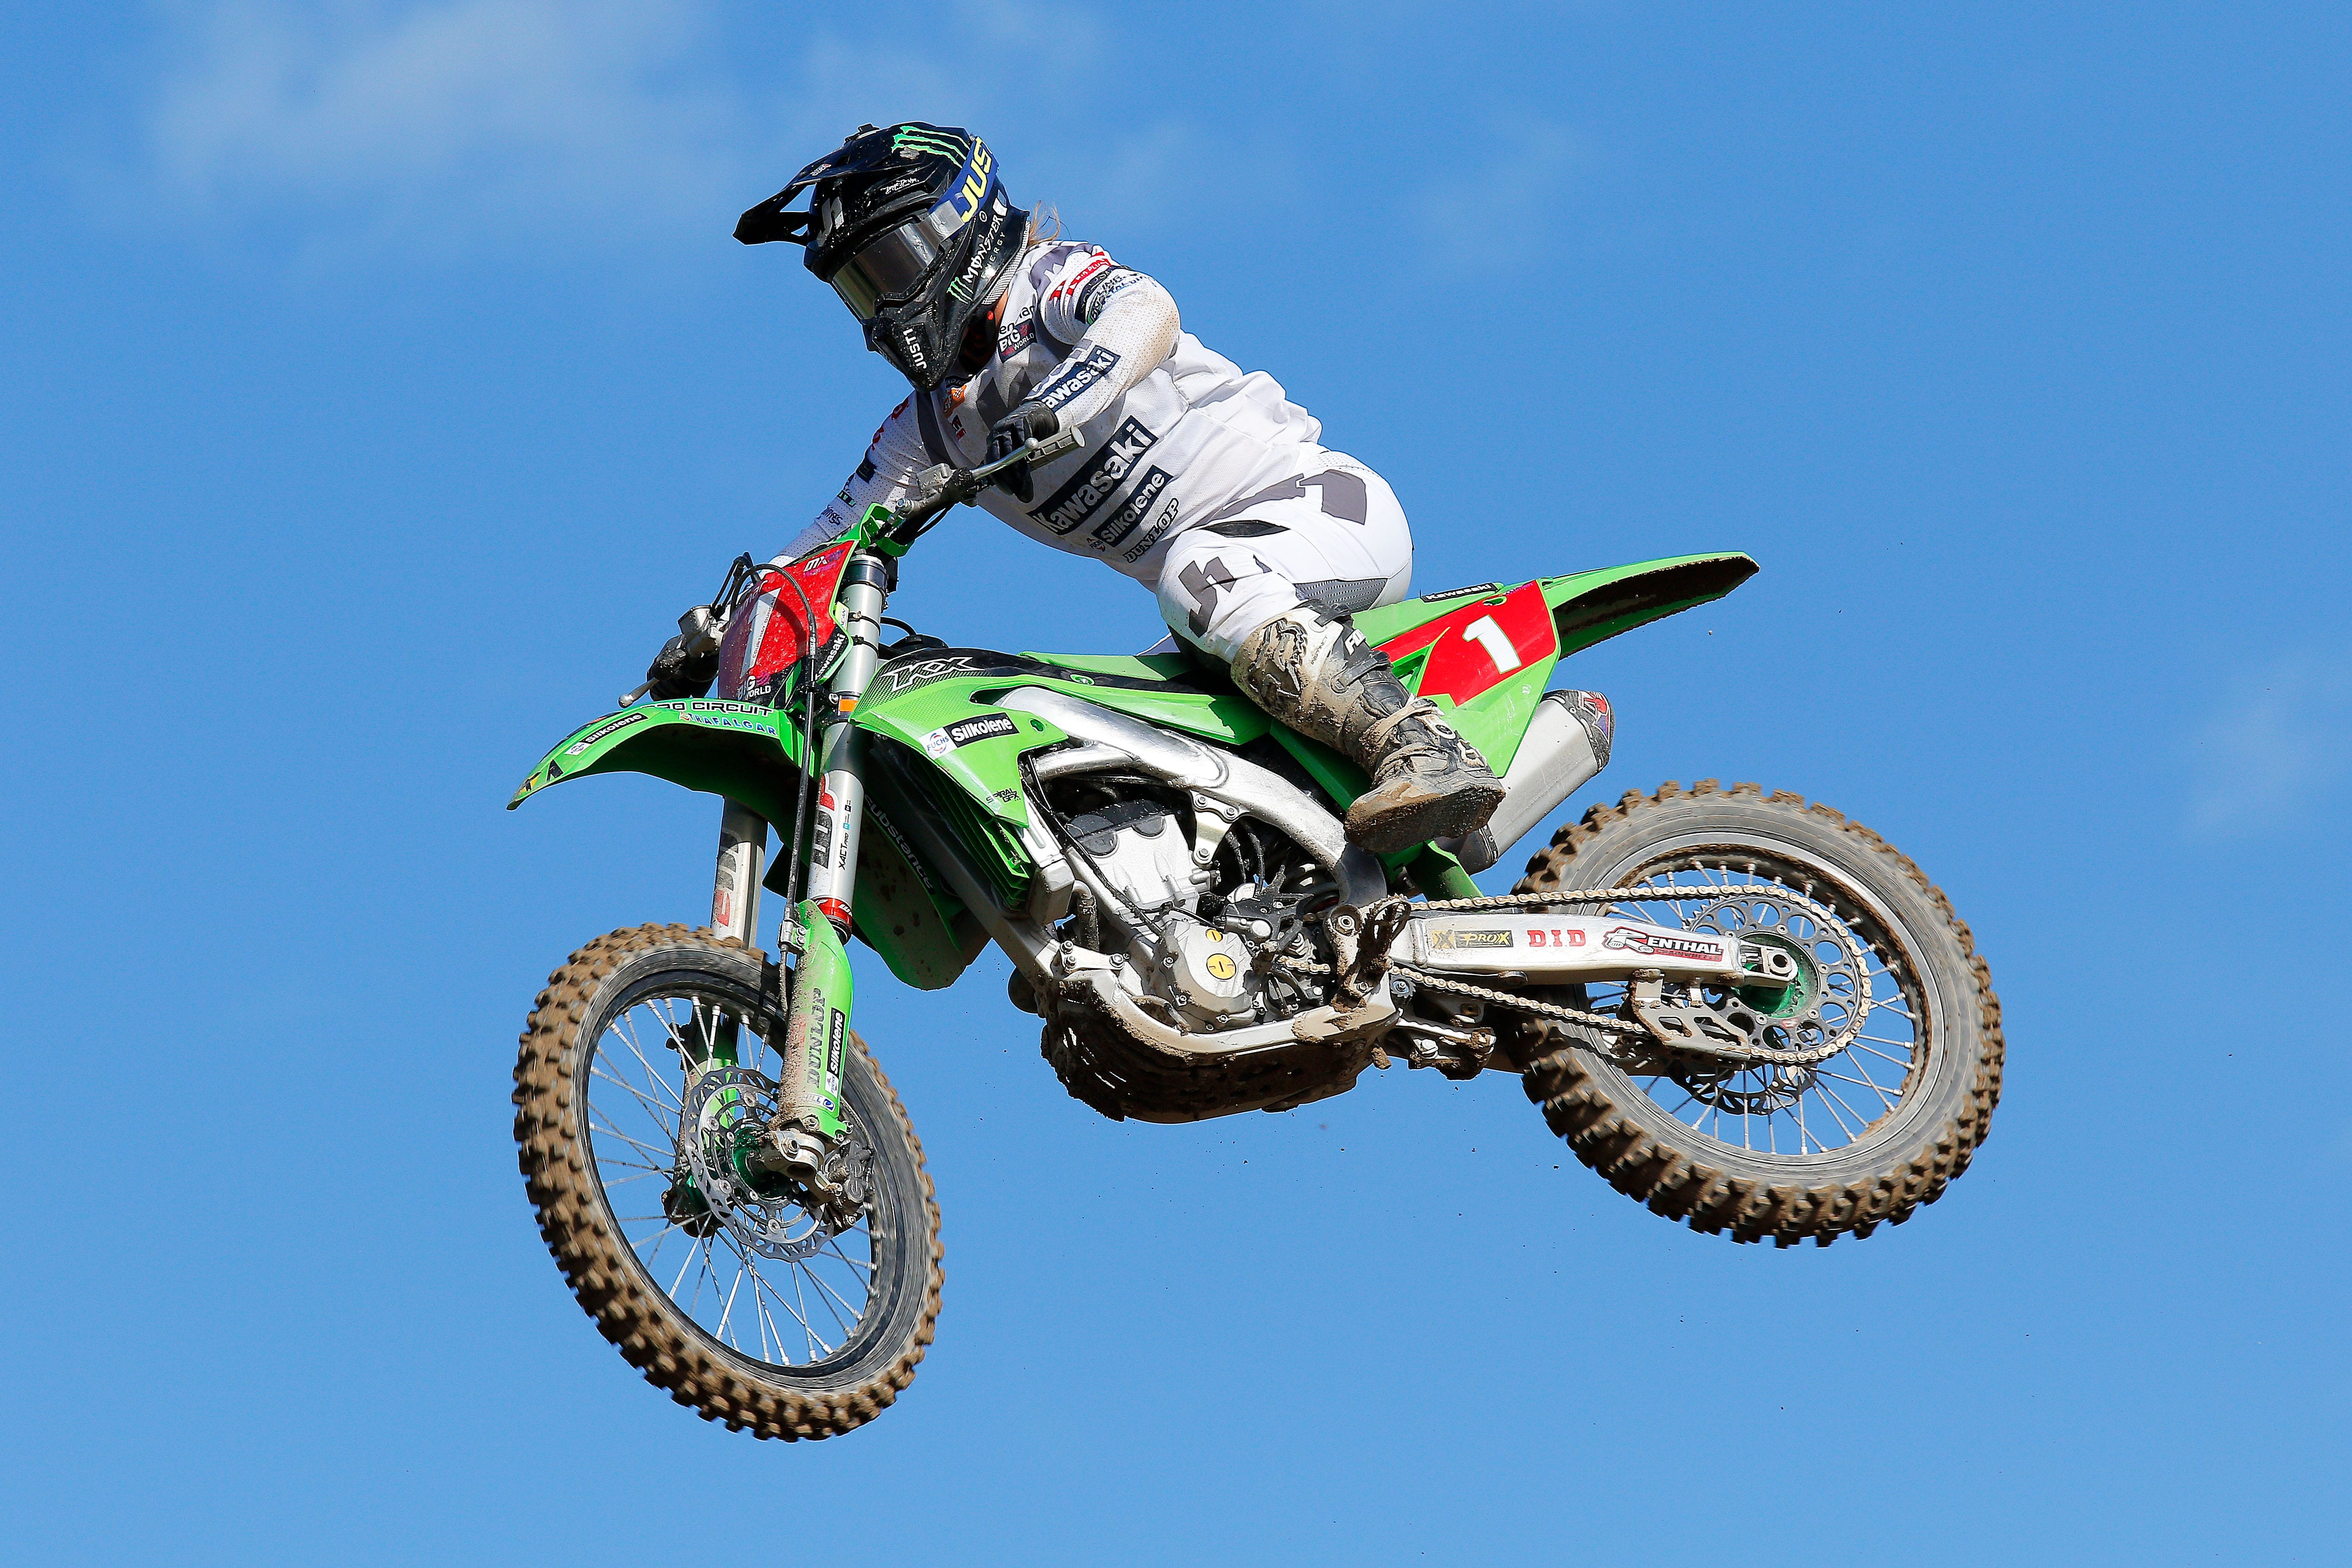 Debut Race Win for the 2021 KX250 with Courtney Duncan